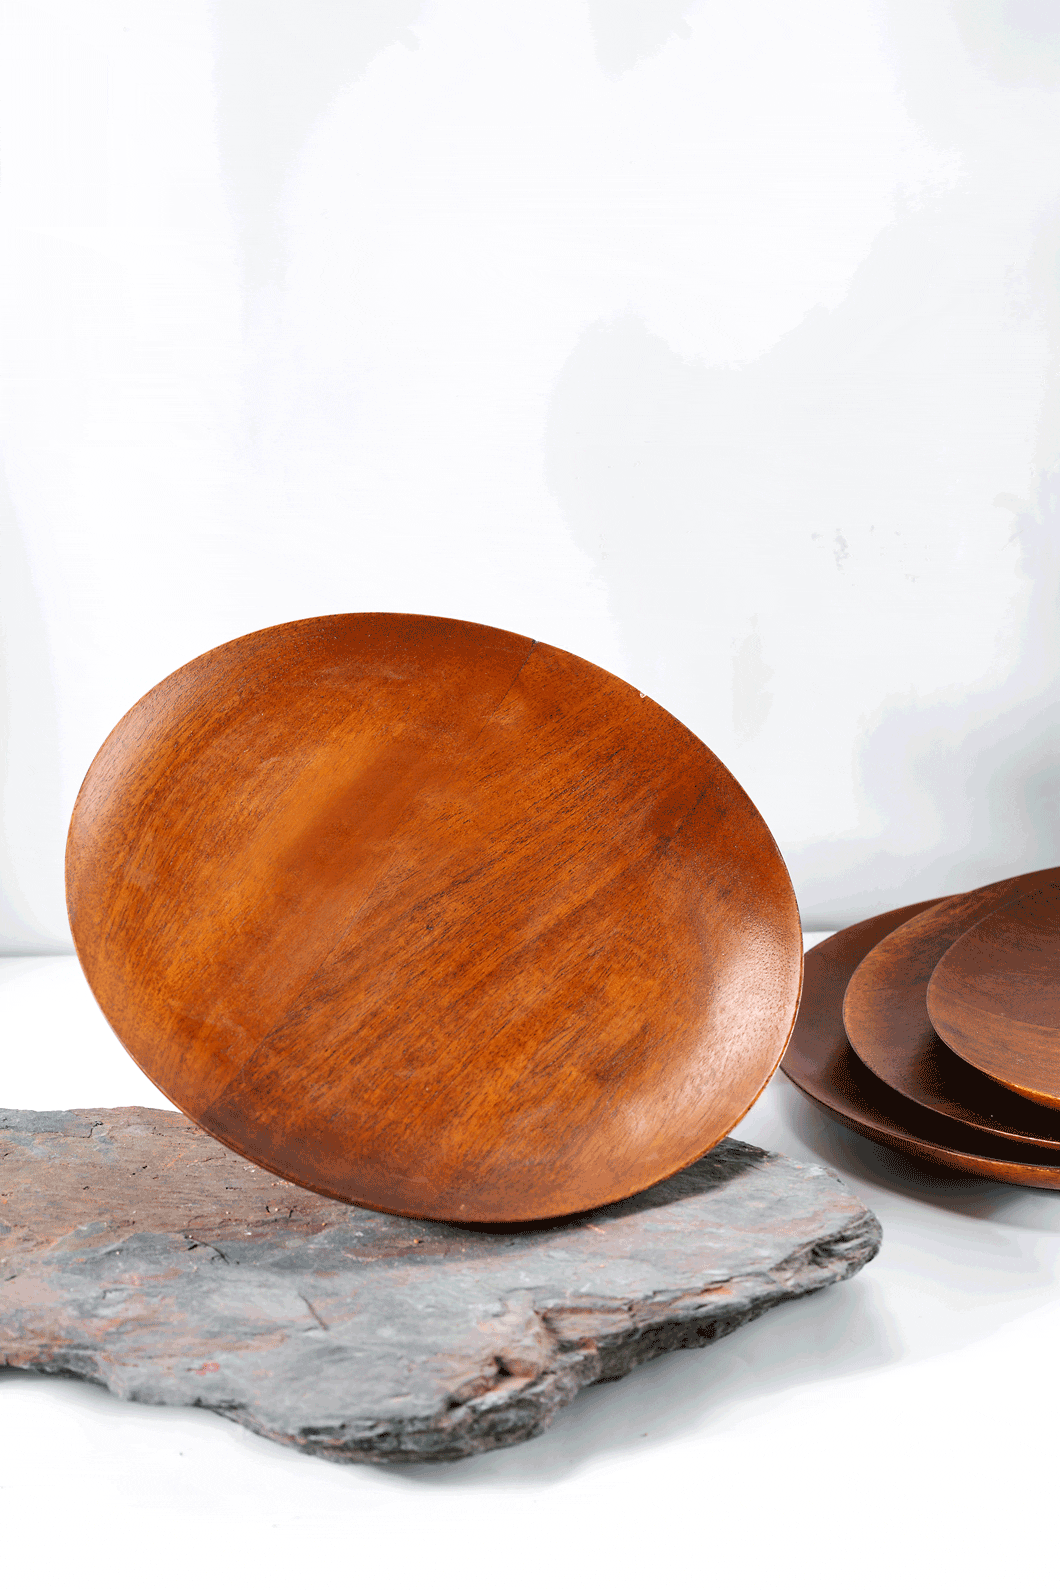 Additional image of Chakr - Set of 4 wooden plates, a product by Araana Homes